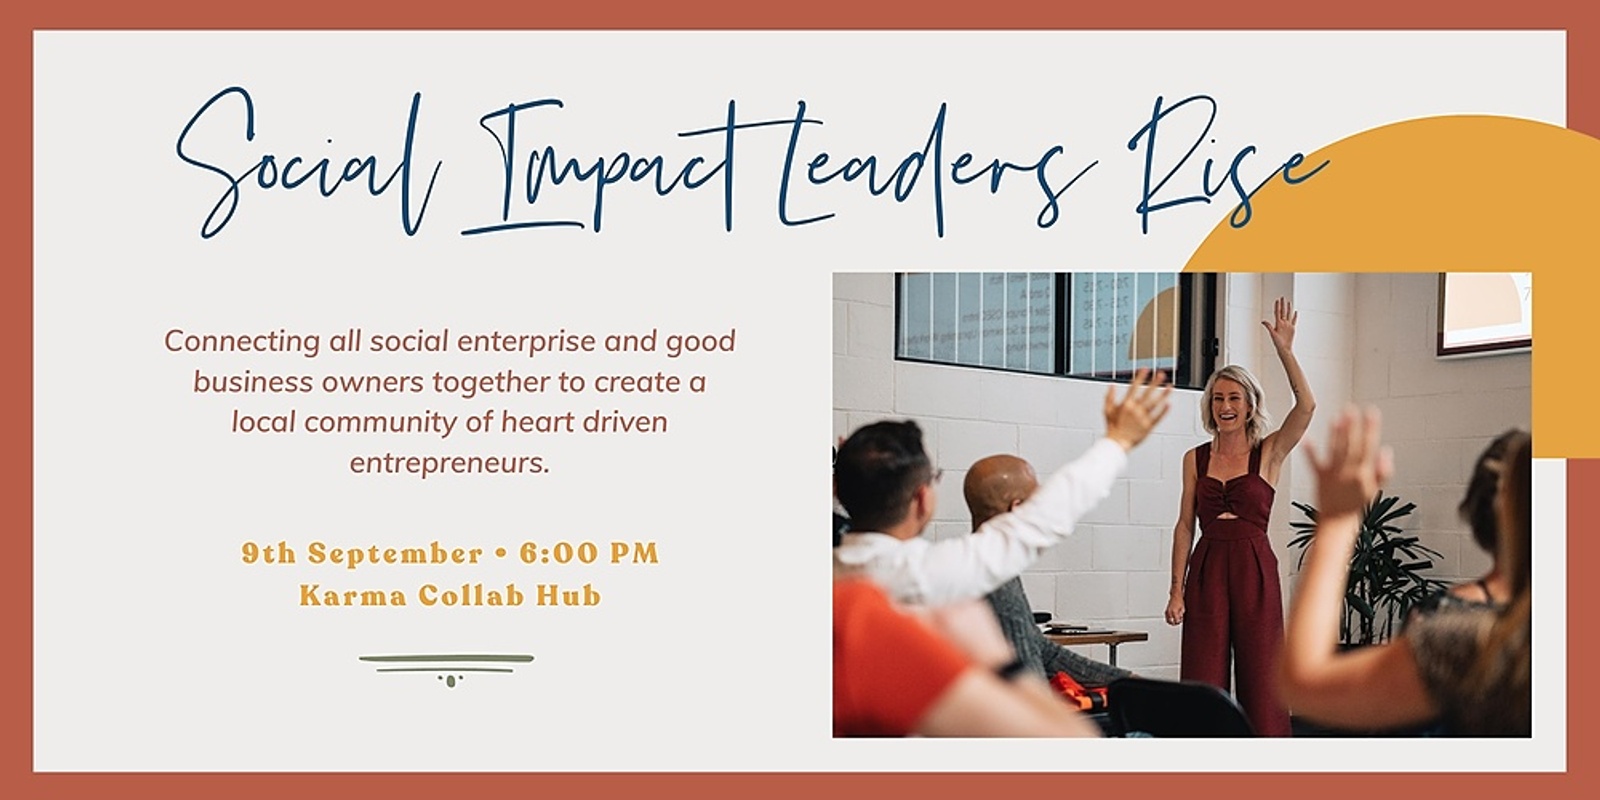 Banner image for Social Impact Leaders Rise (Gold Coast)